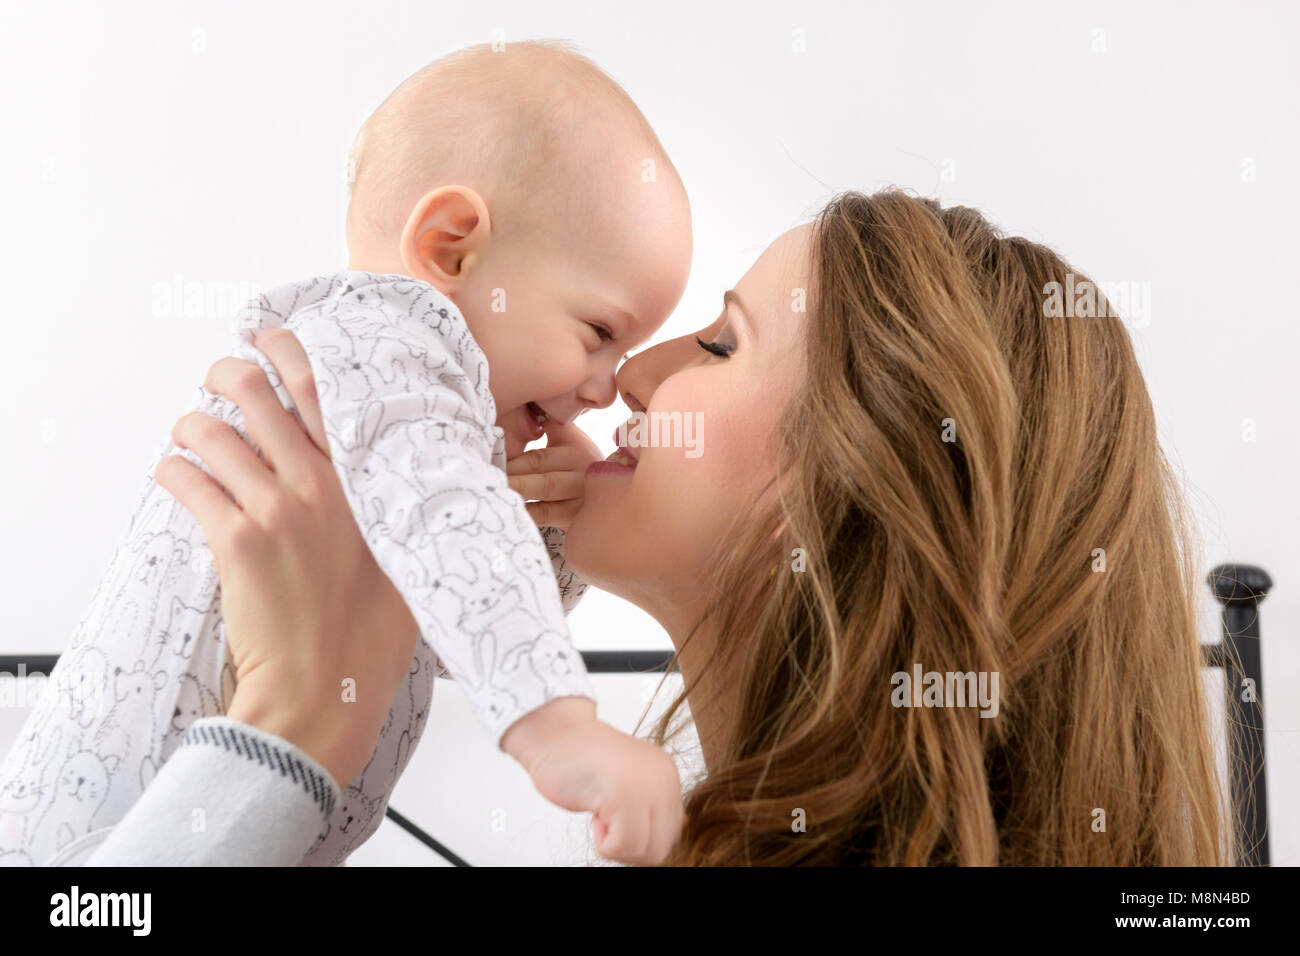 Happy mother and her baby son playing on a bed together. Happy family. Mother and newborn child portrait. Stock Photo